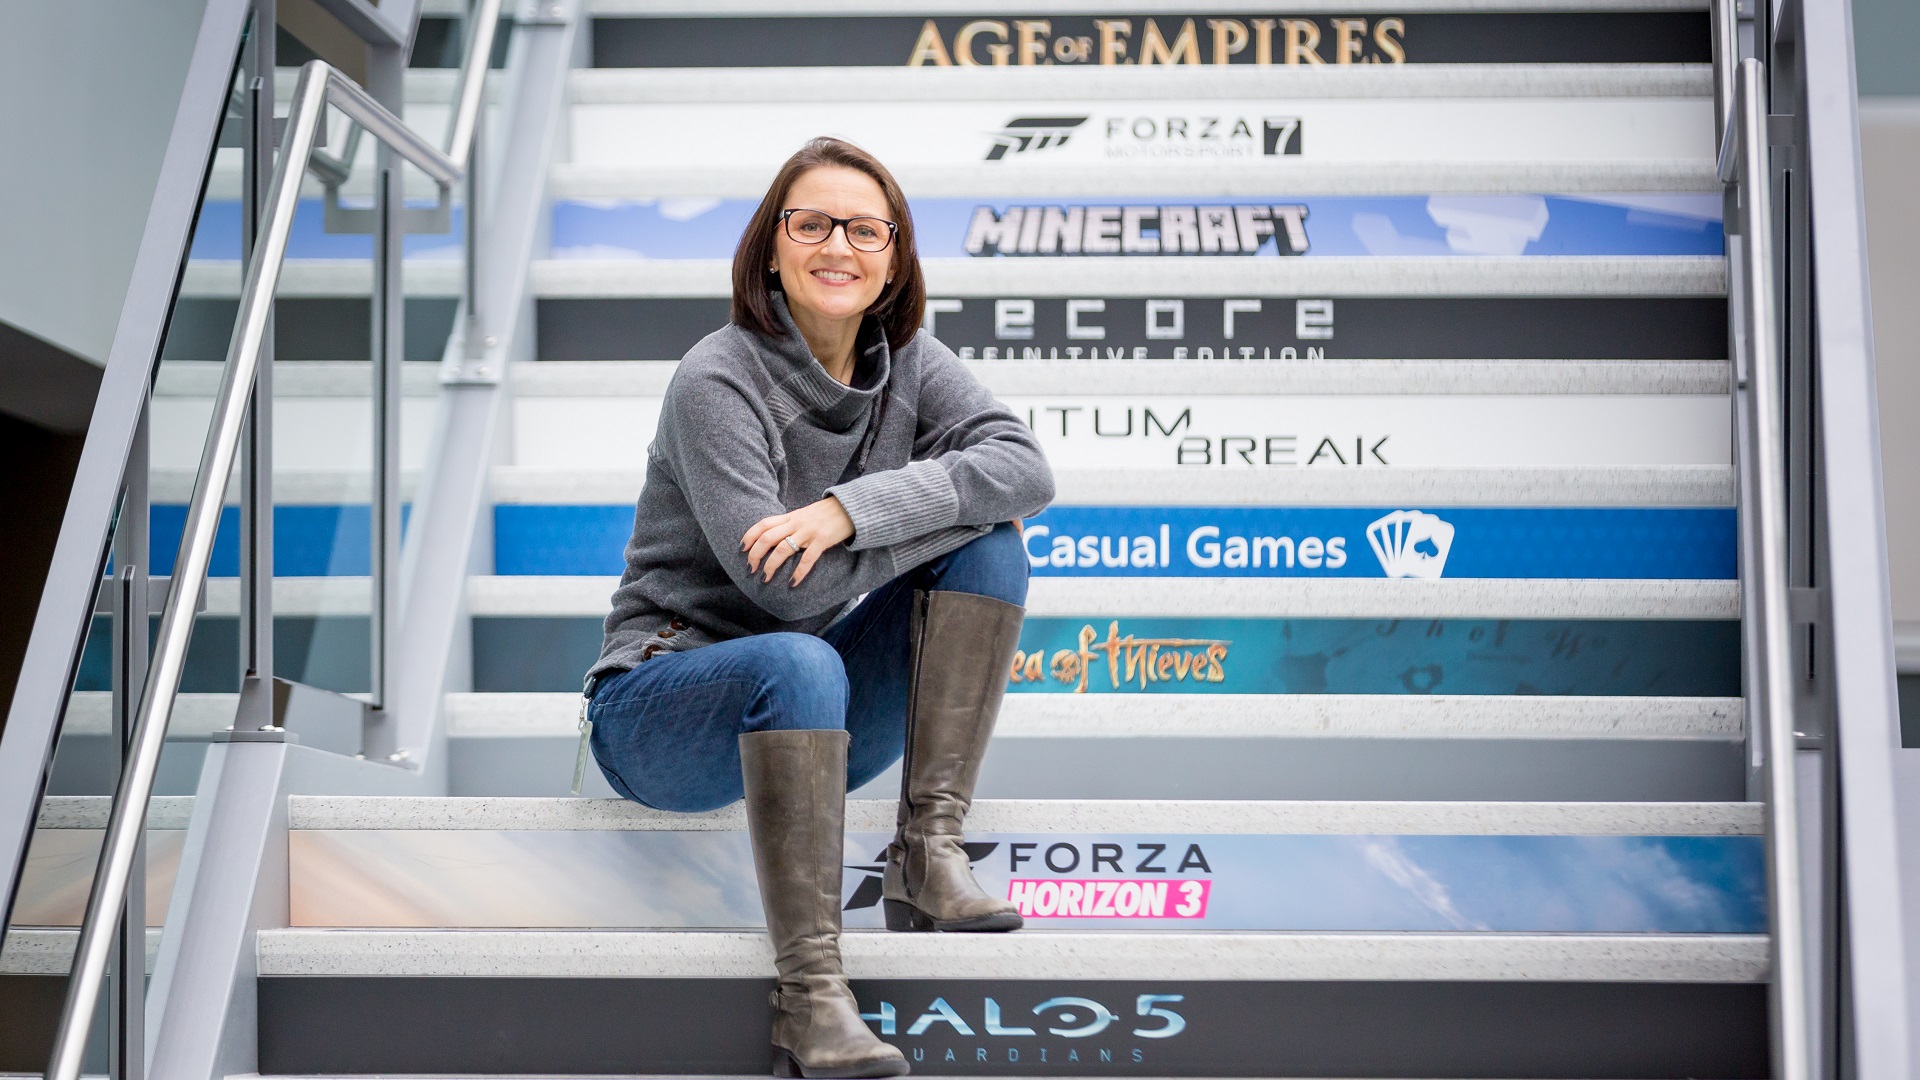 Katy Jo Wright, Head of Gaming for Everyone and Sustainability at Xbox